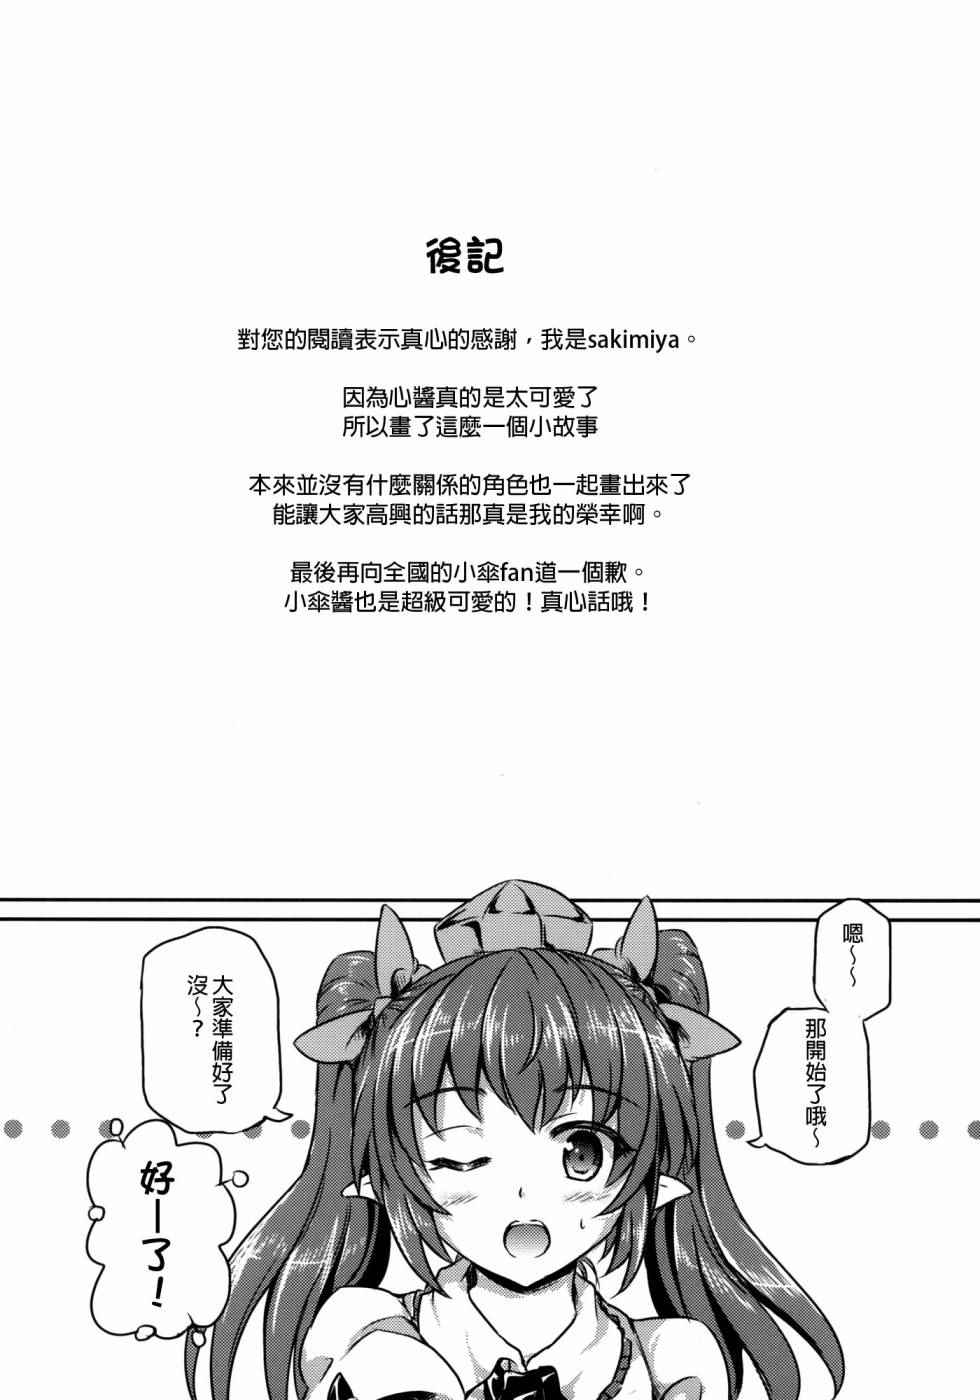 《Show me your smile!》漫画 Show me your smile 短篇